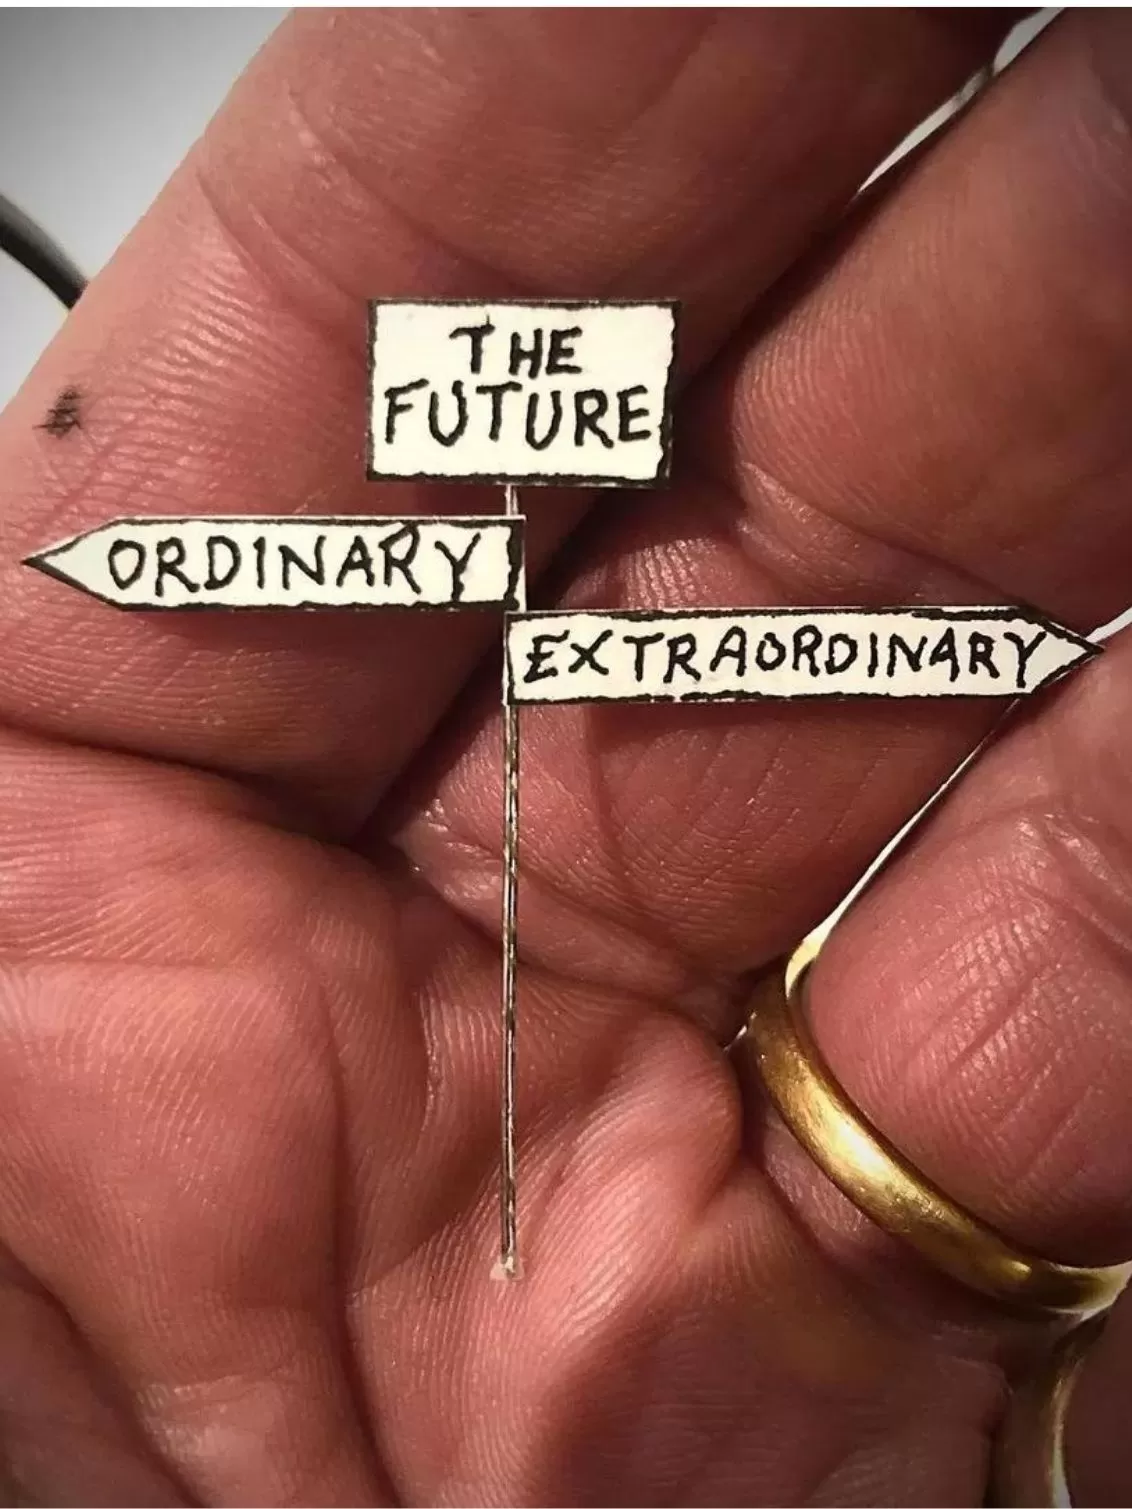 The Future, ordinary and extraodinary signs seen held by a hand